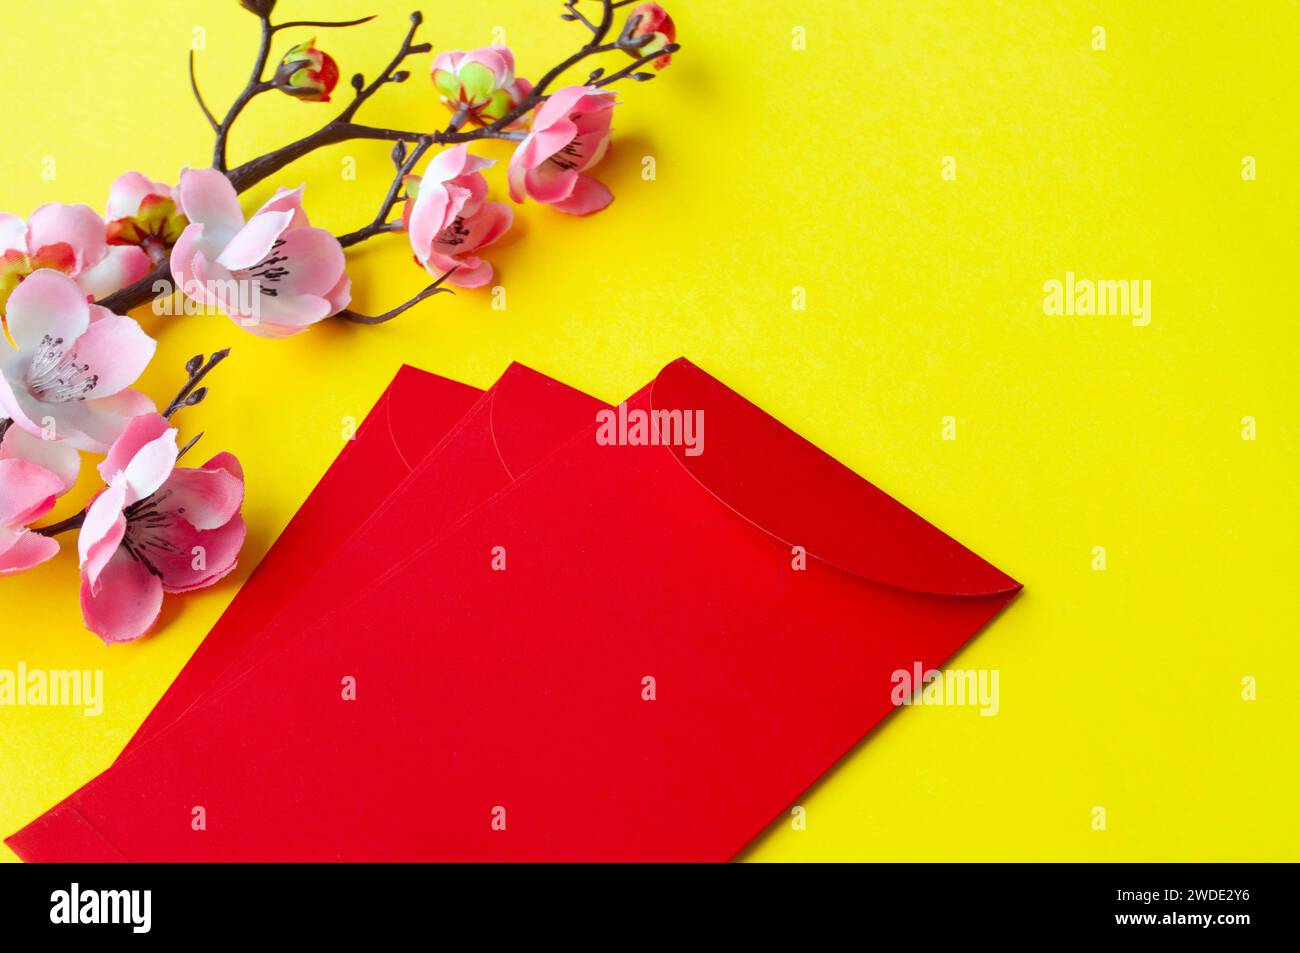 Chinese New Year red packet with customizable space for text or wishes. Chinese New Year celebration concept. Stock Photo